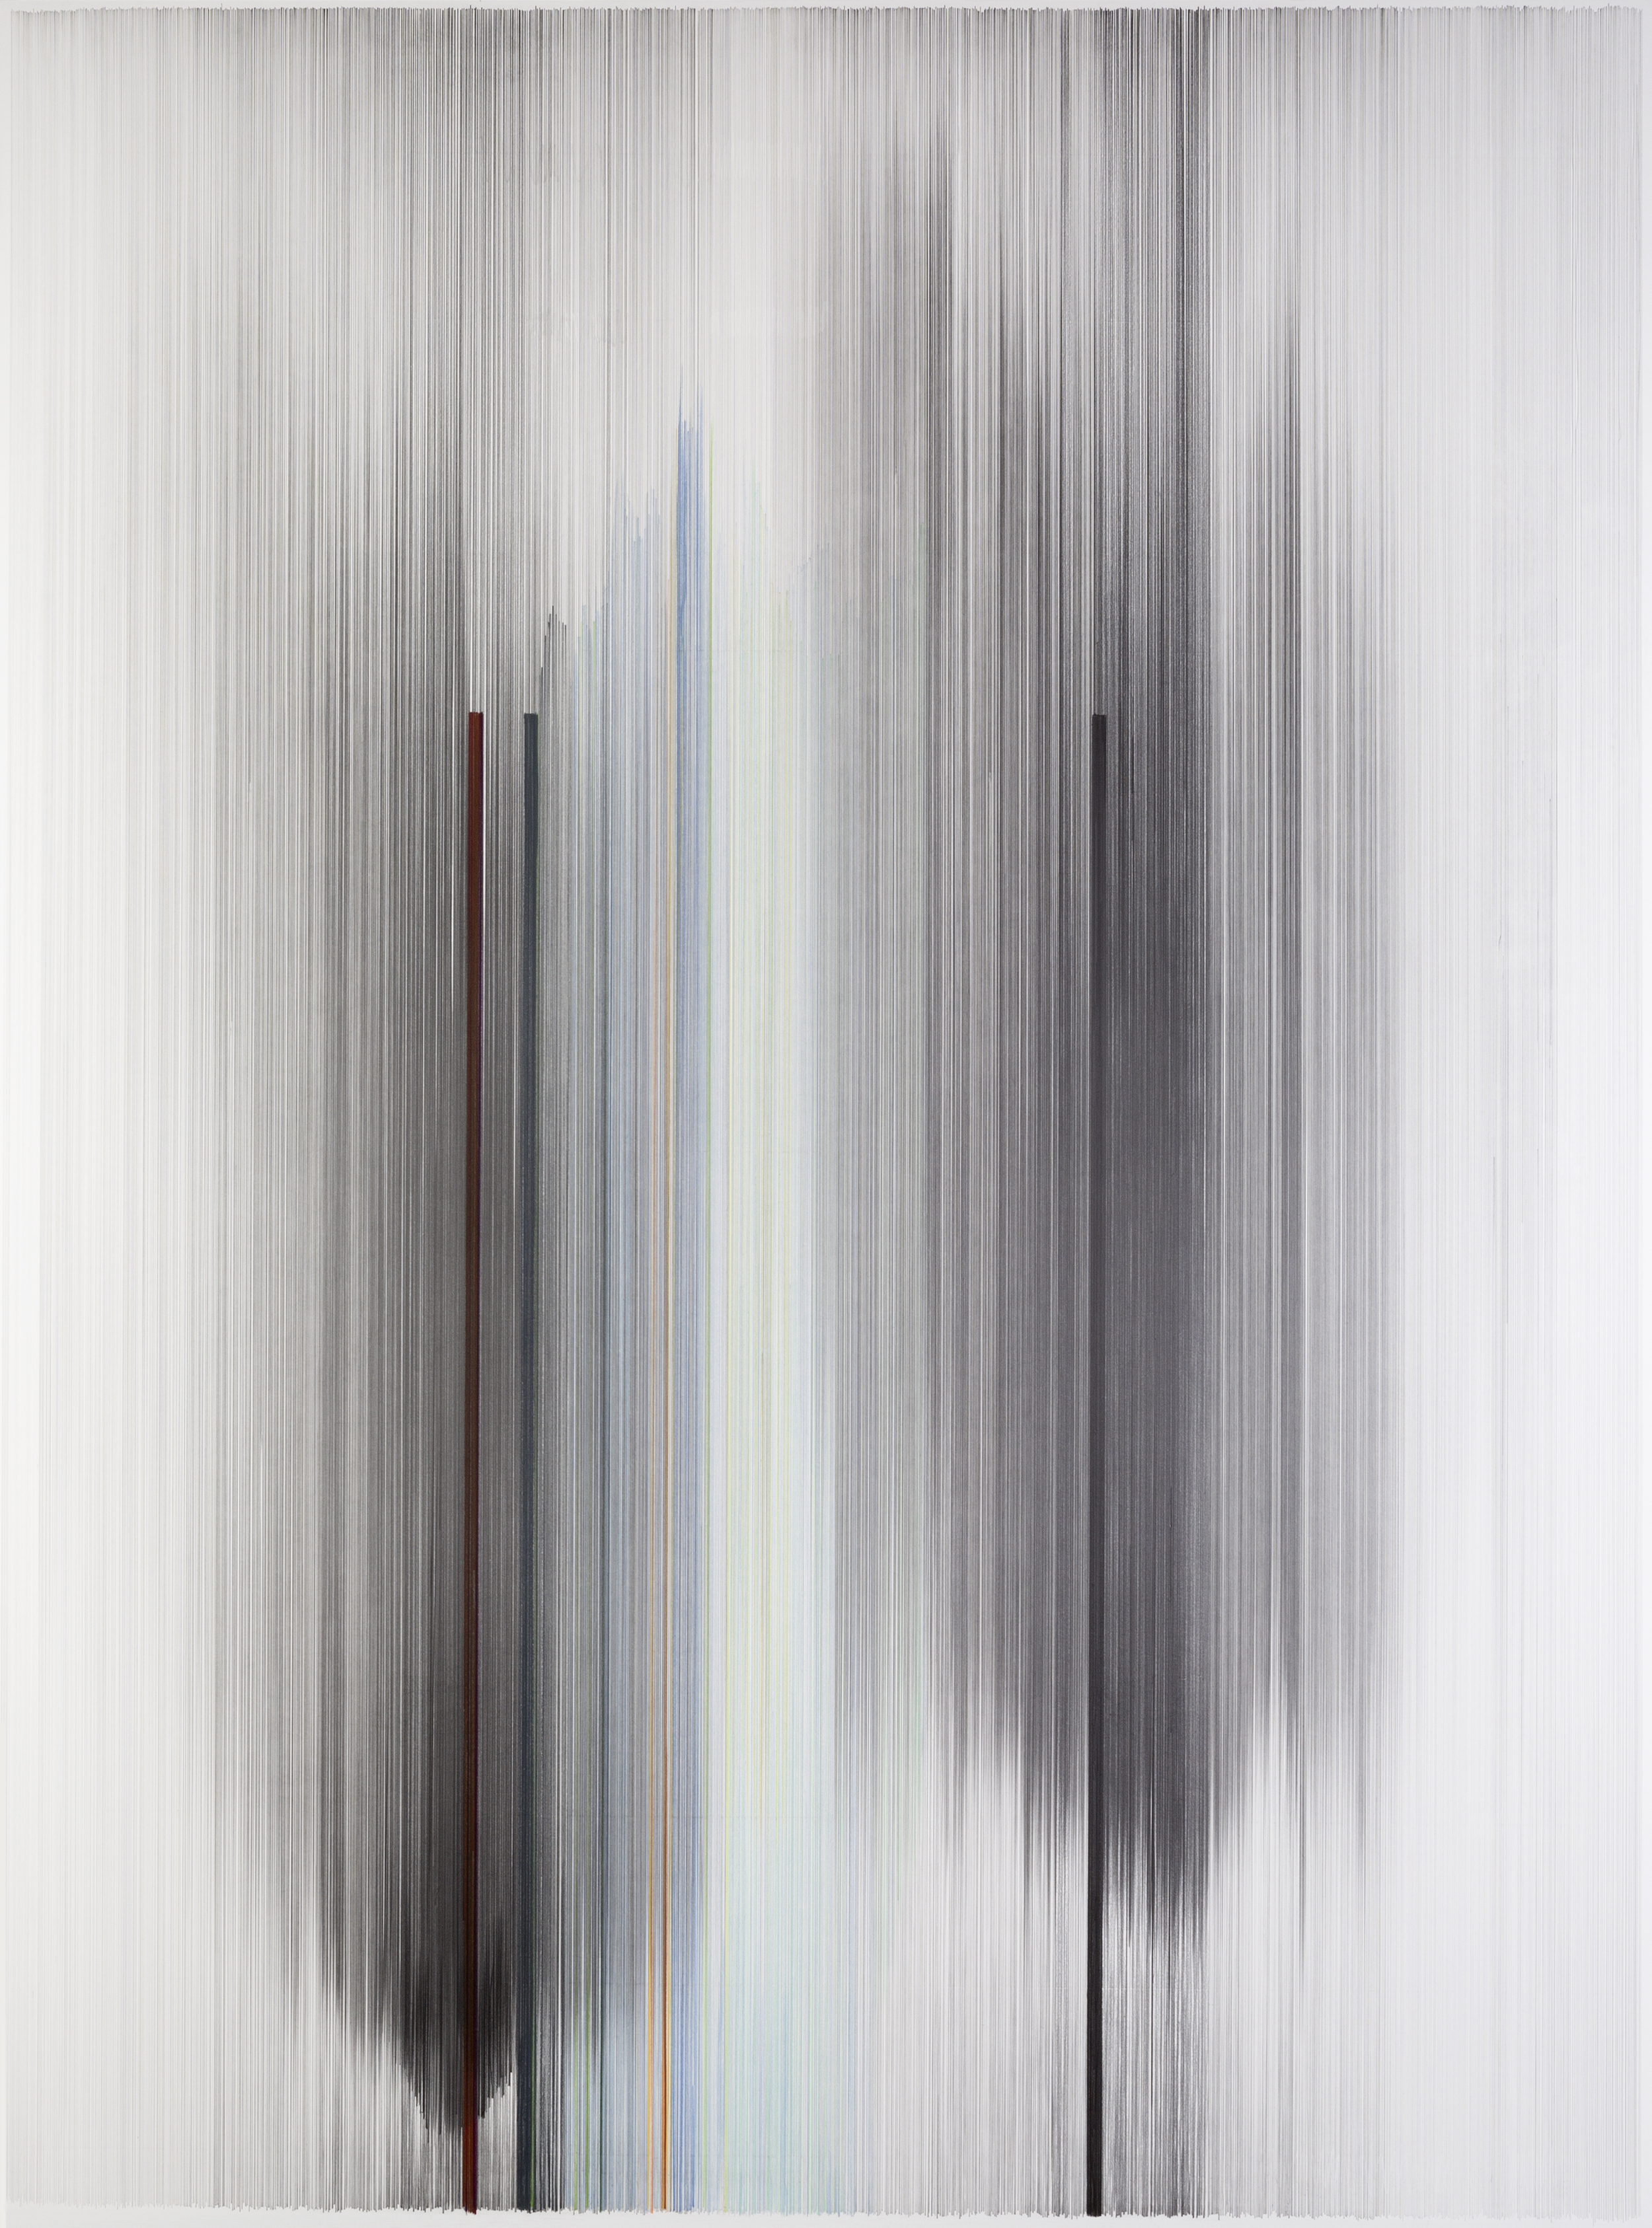    notations 11   2015 graphite and colored pencil on mat board 60 x 80 inches private collection 